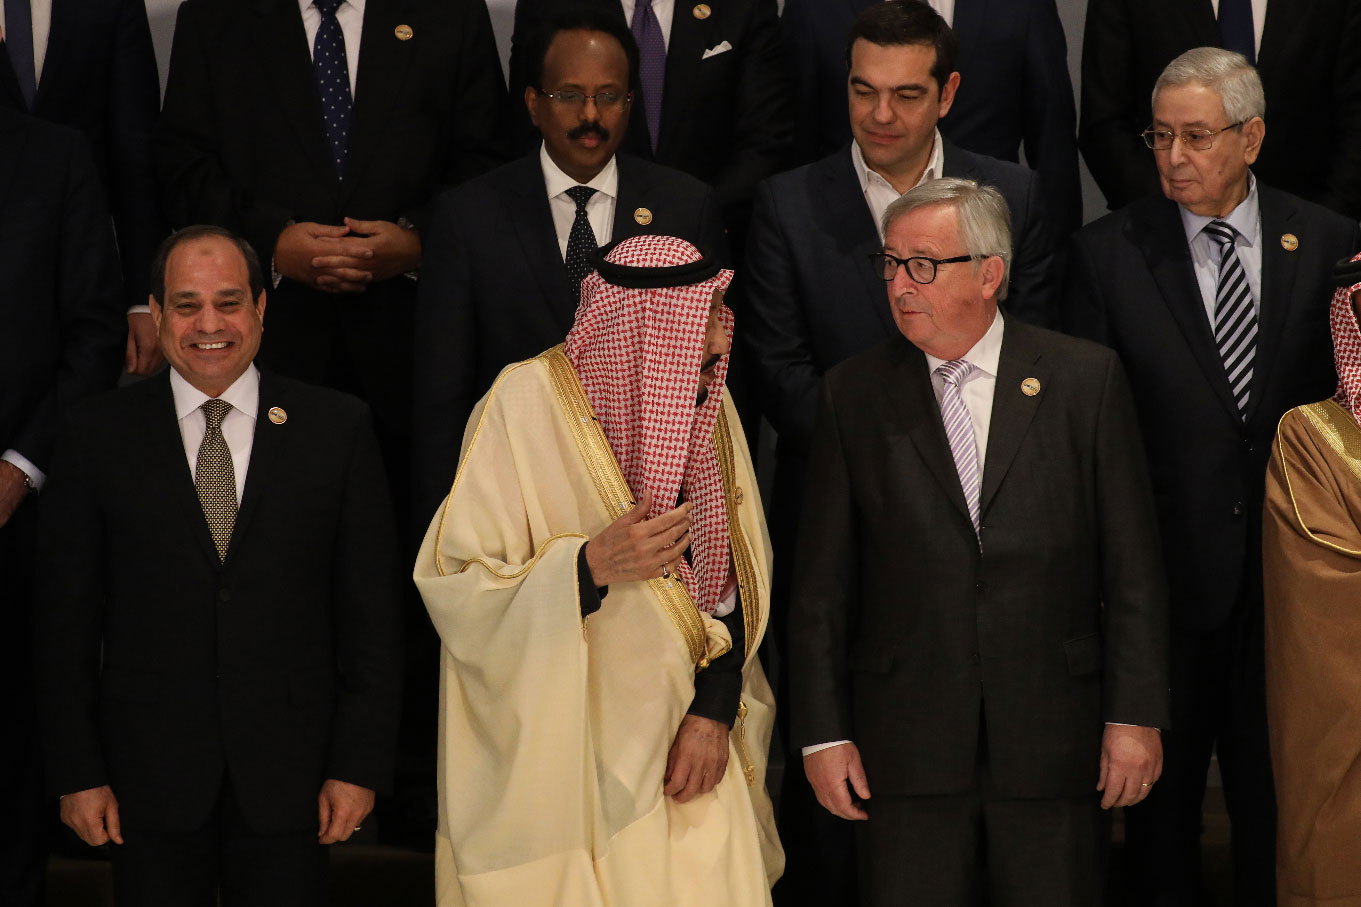 First row from left : Egyptian President Abdel Fattah el-Sisi, Saudi King Salman bin Abdulaziz Al Saud and European Commission President Jean-Claude Juncker pose for the family photo of the Arab League and European Union leaders during the European Union (EU) and League of Arab States (LAS) summit at the Sharm El Sheikh convention center.